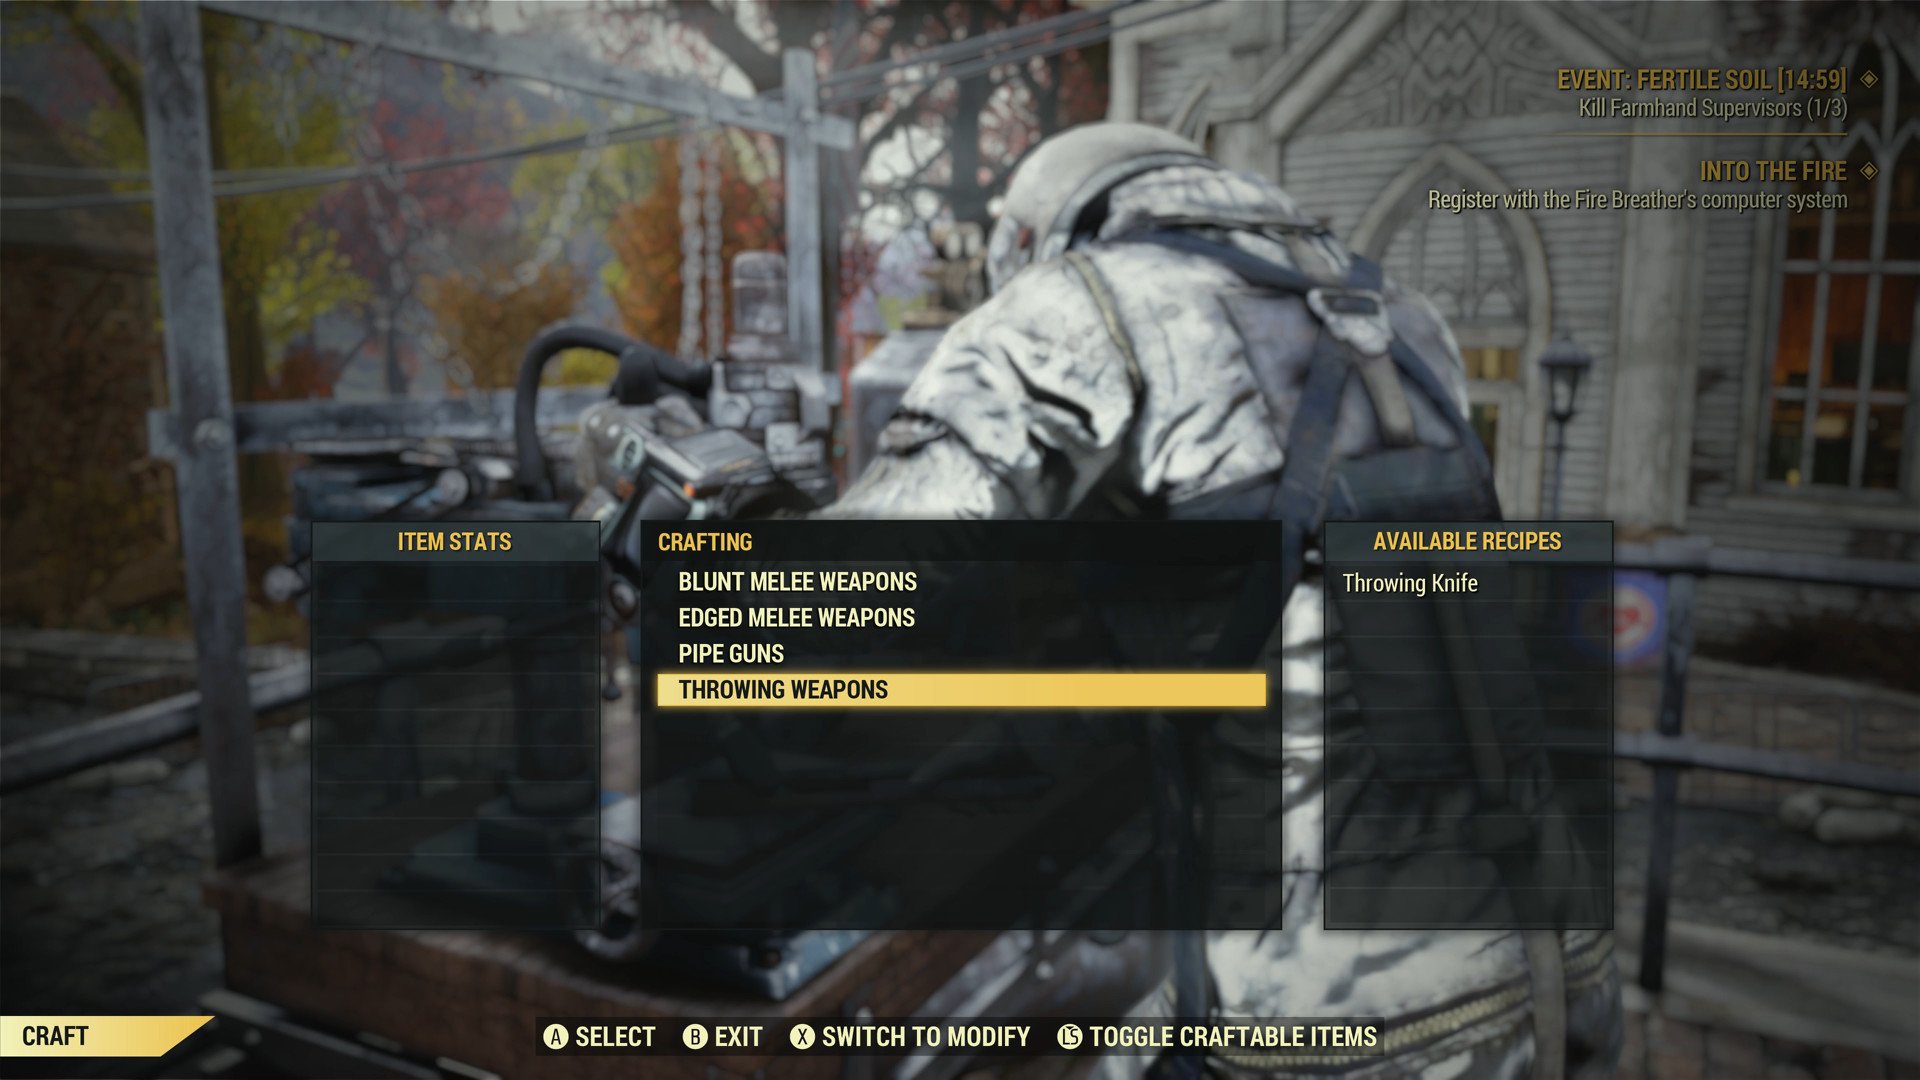 How To Earn Xp And Level Up Fast In Fallout 76 Windows Central